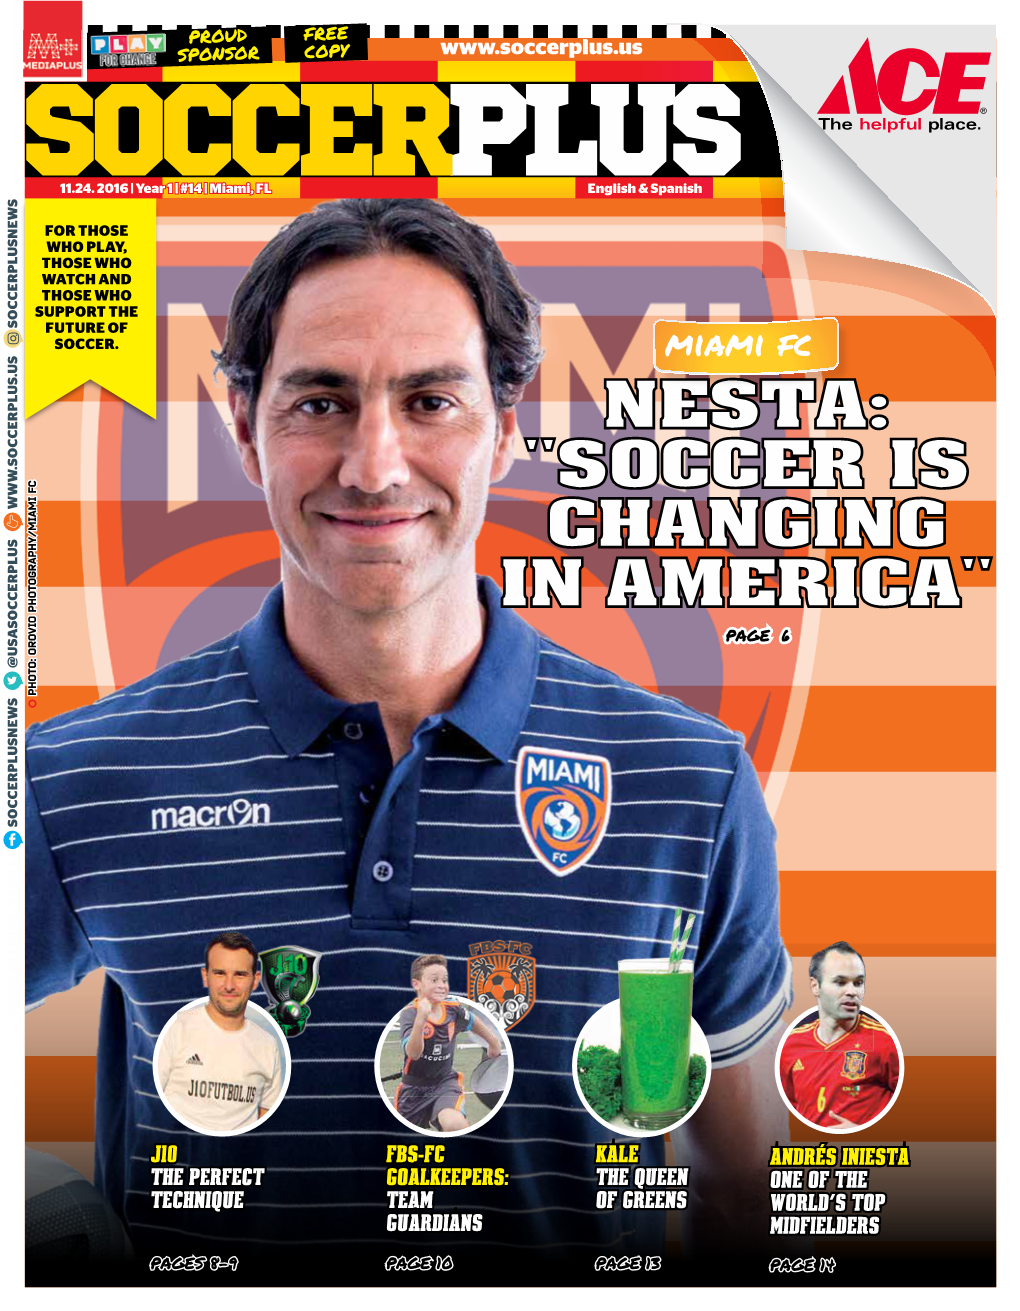 Nesta: "Soccer Is Changing in America"